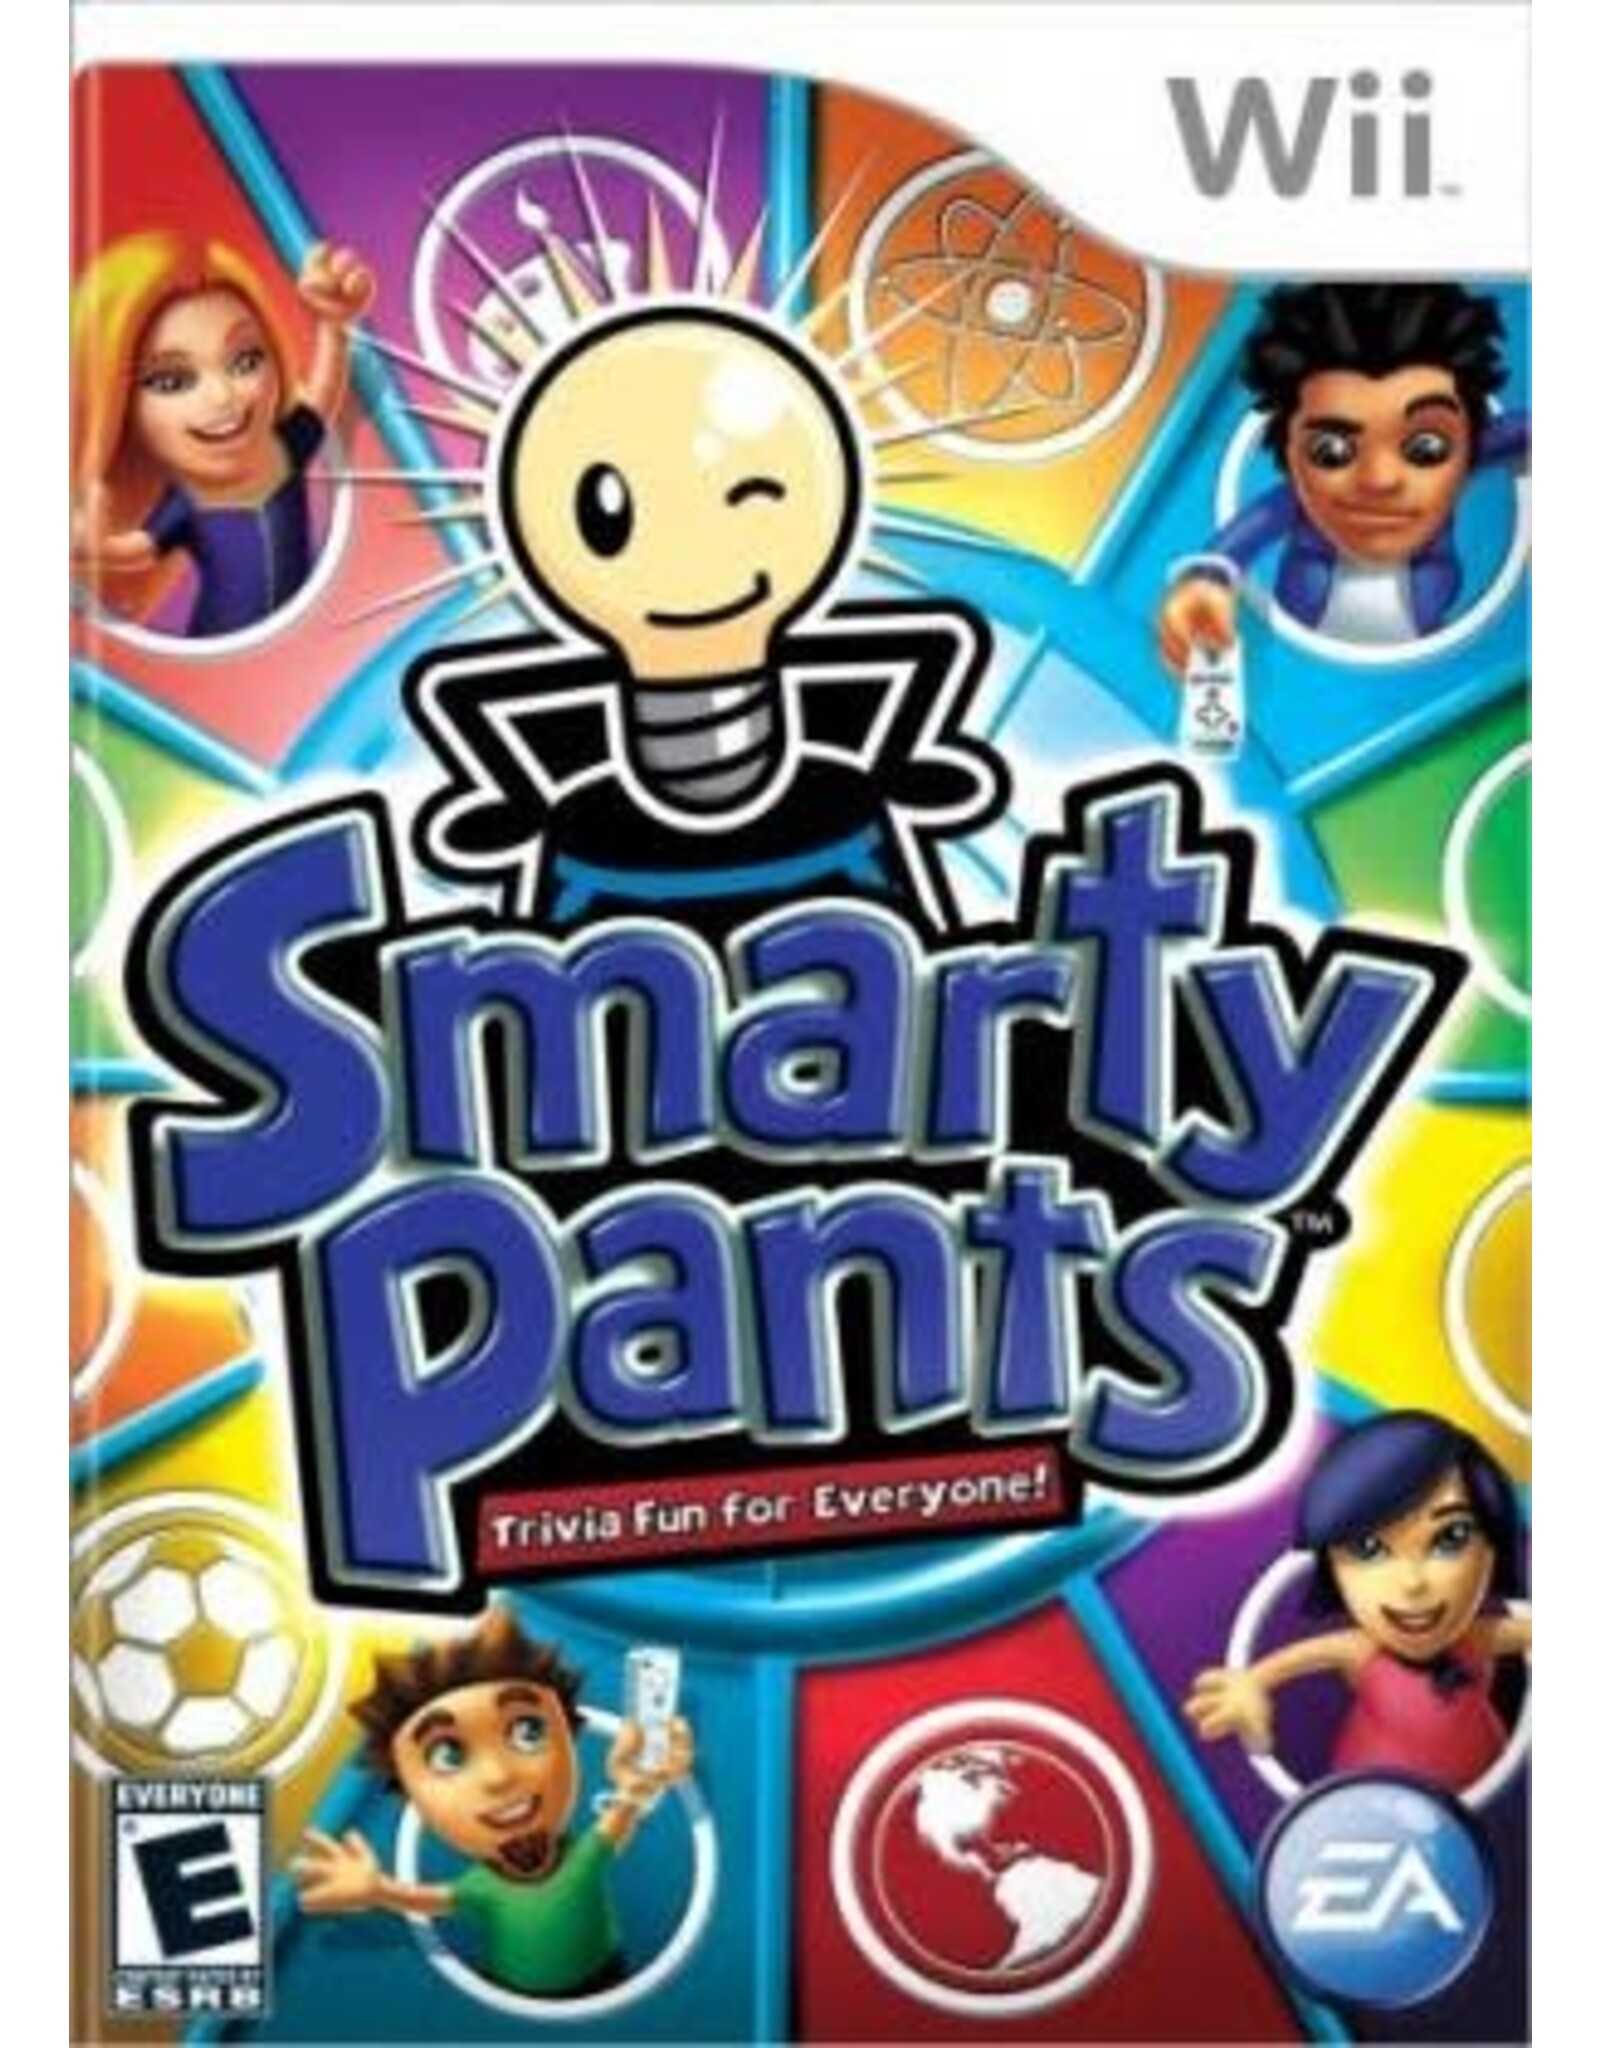 Wii Smarty Pants (Used, No Manual, Cosmetic Damage)